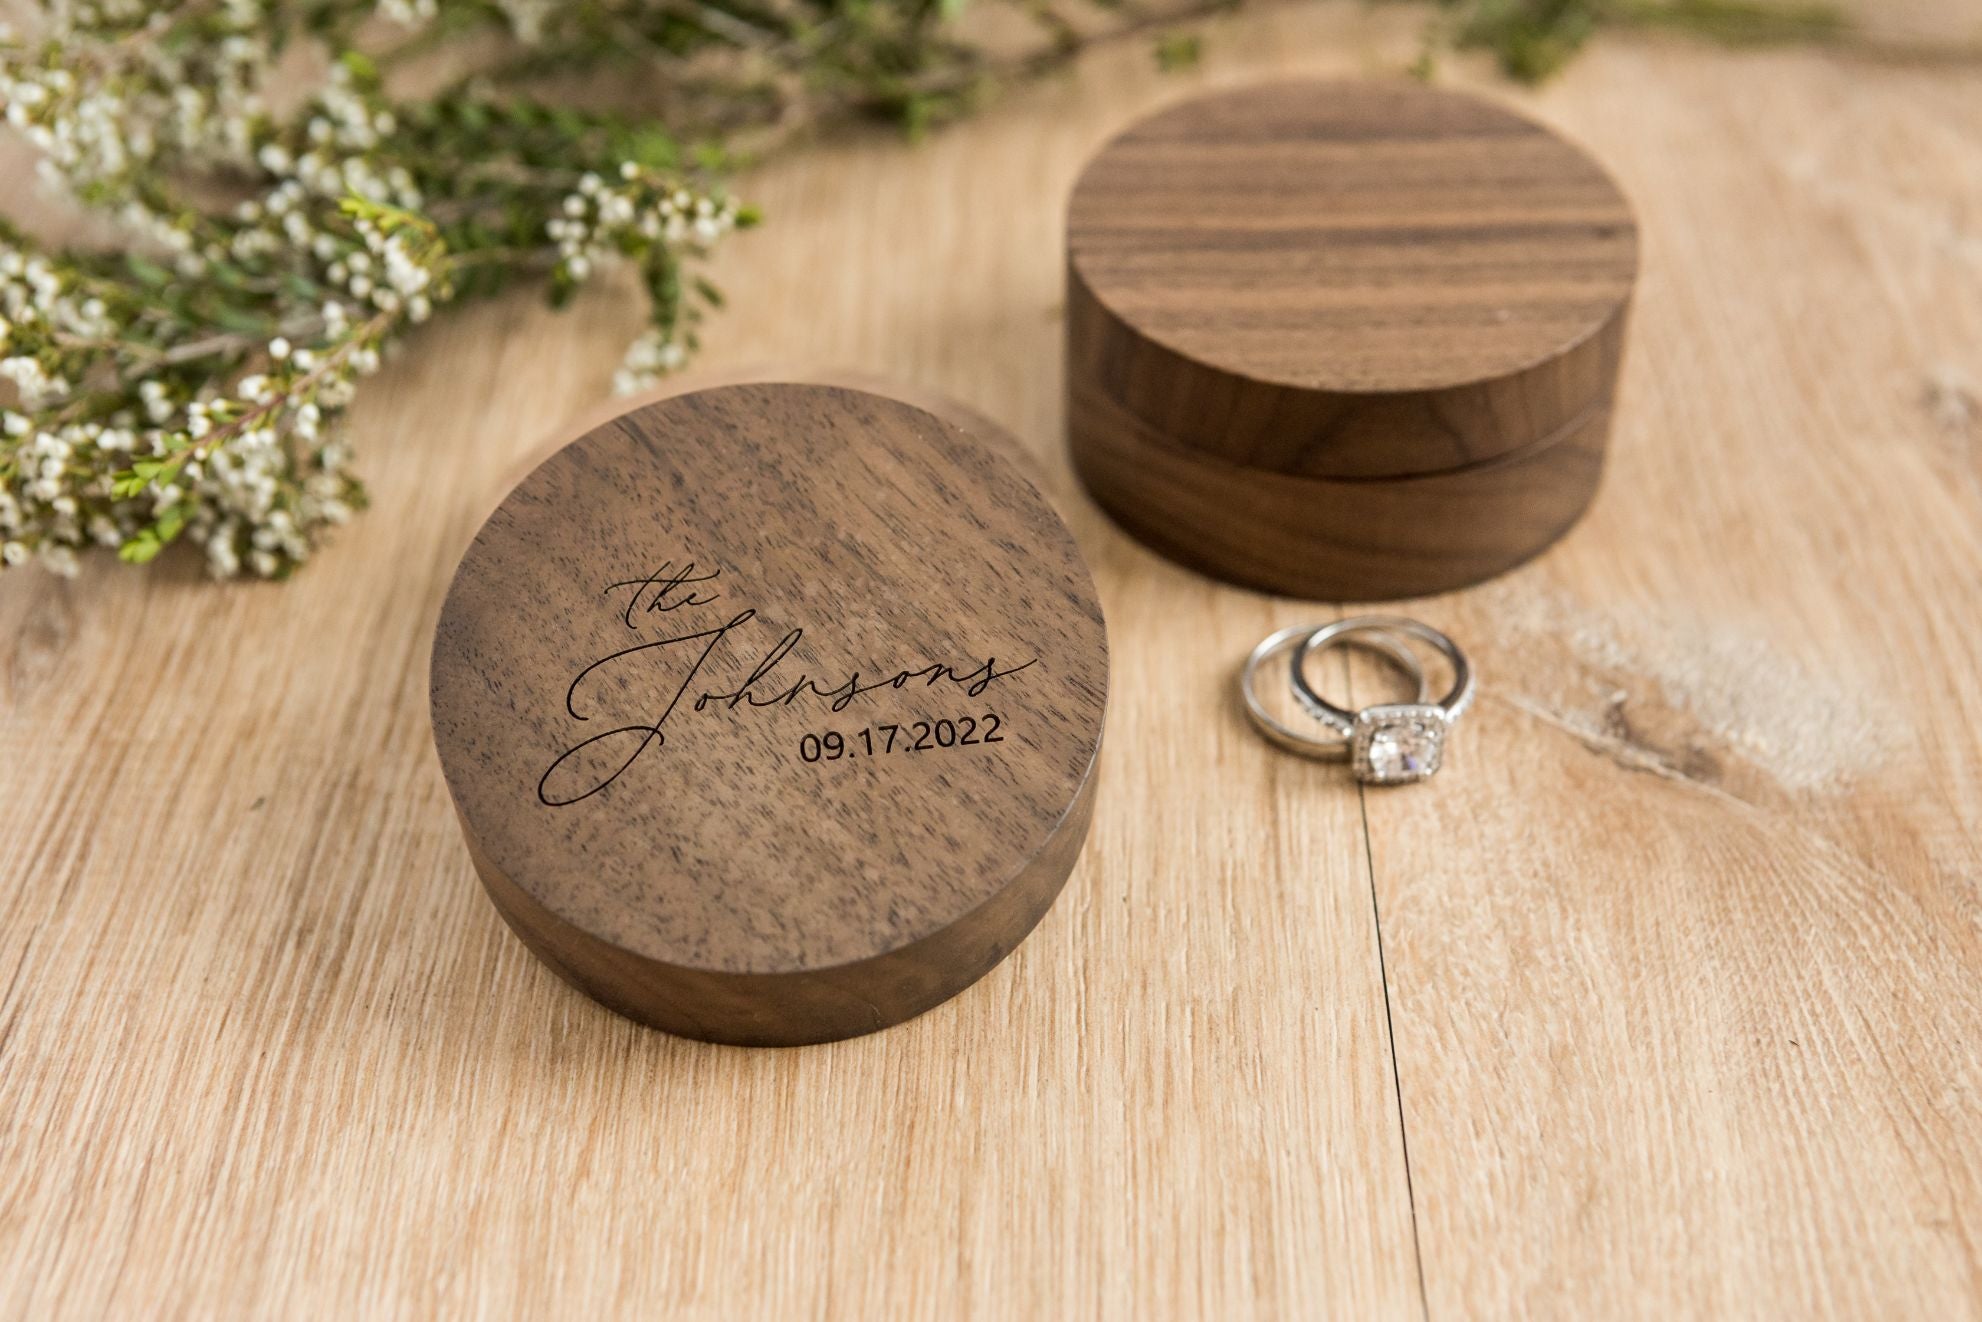 Buy Engagement Ring Box Square Wooden Ring Box for Wedding Ceremony Double  Slot Wedding Ring Box Ring Bearer Box Anniversary Gift Online in India -  Etsy